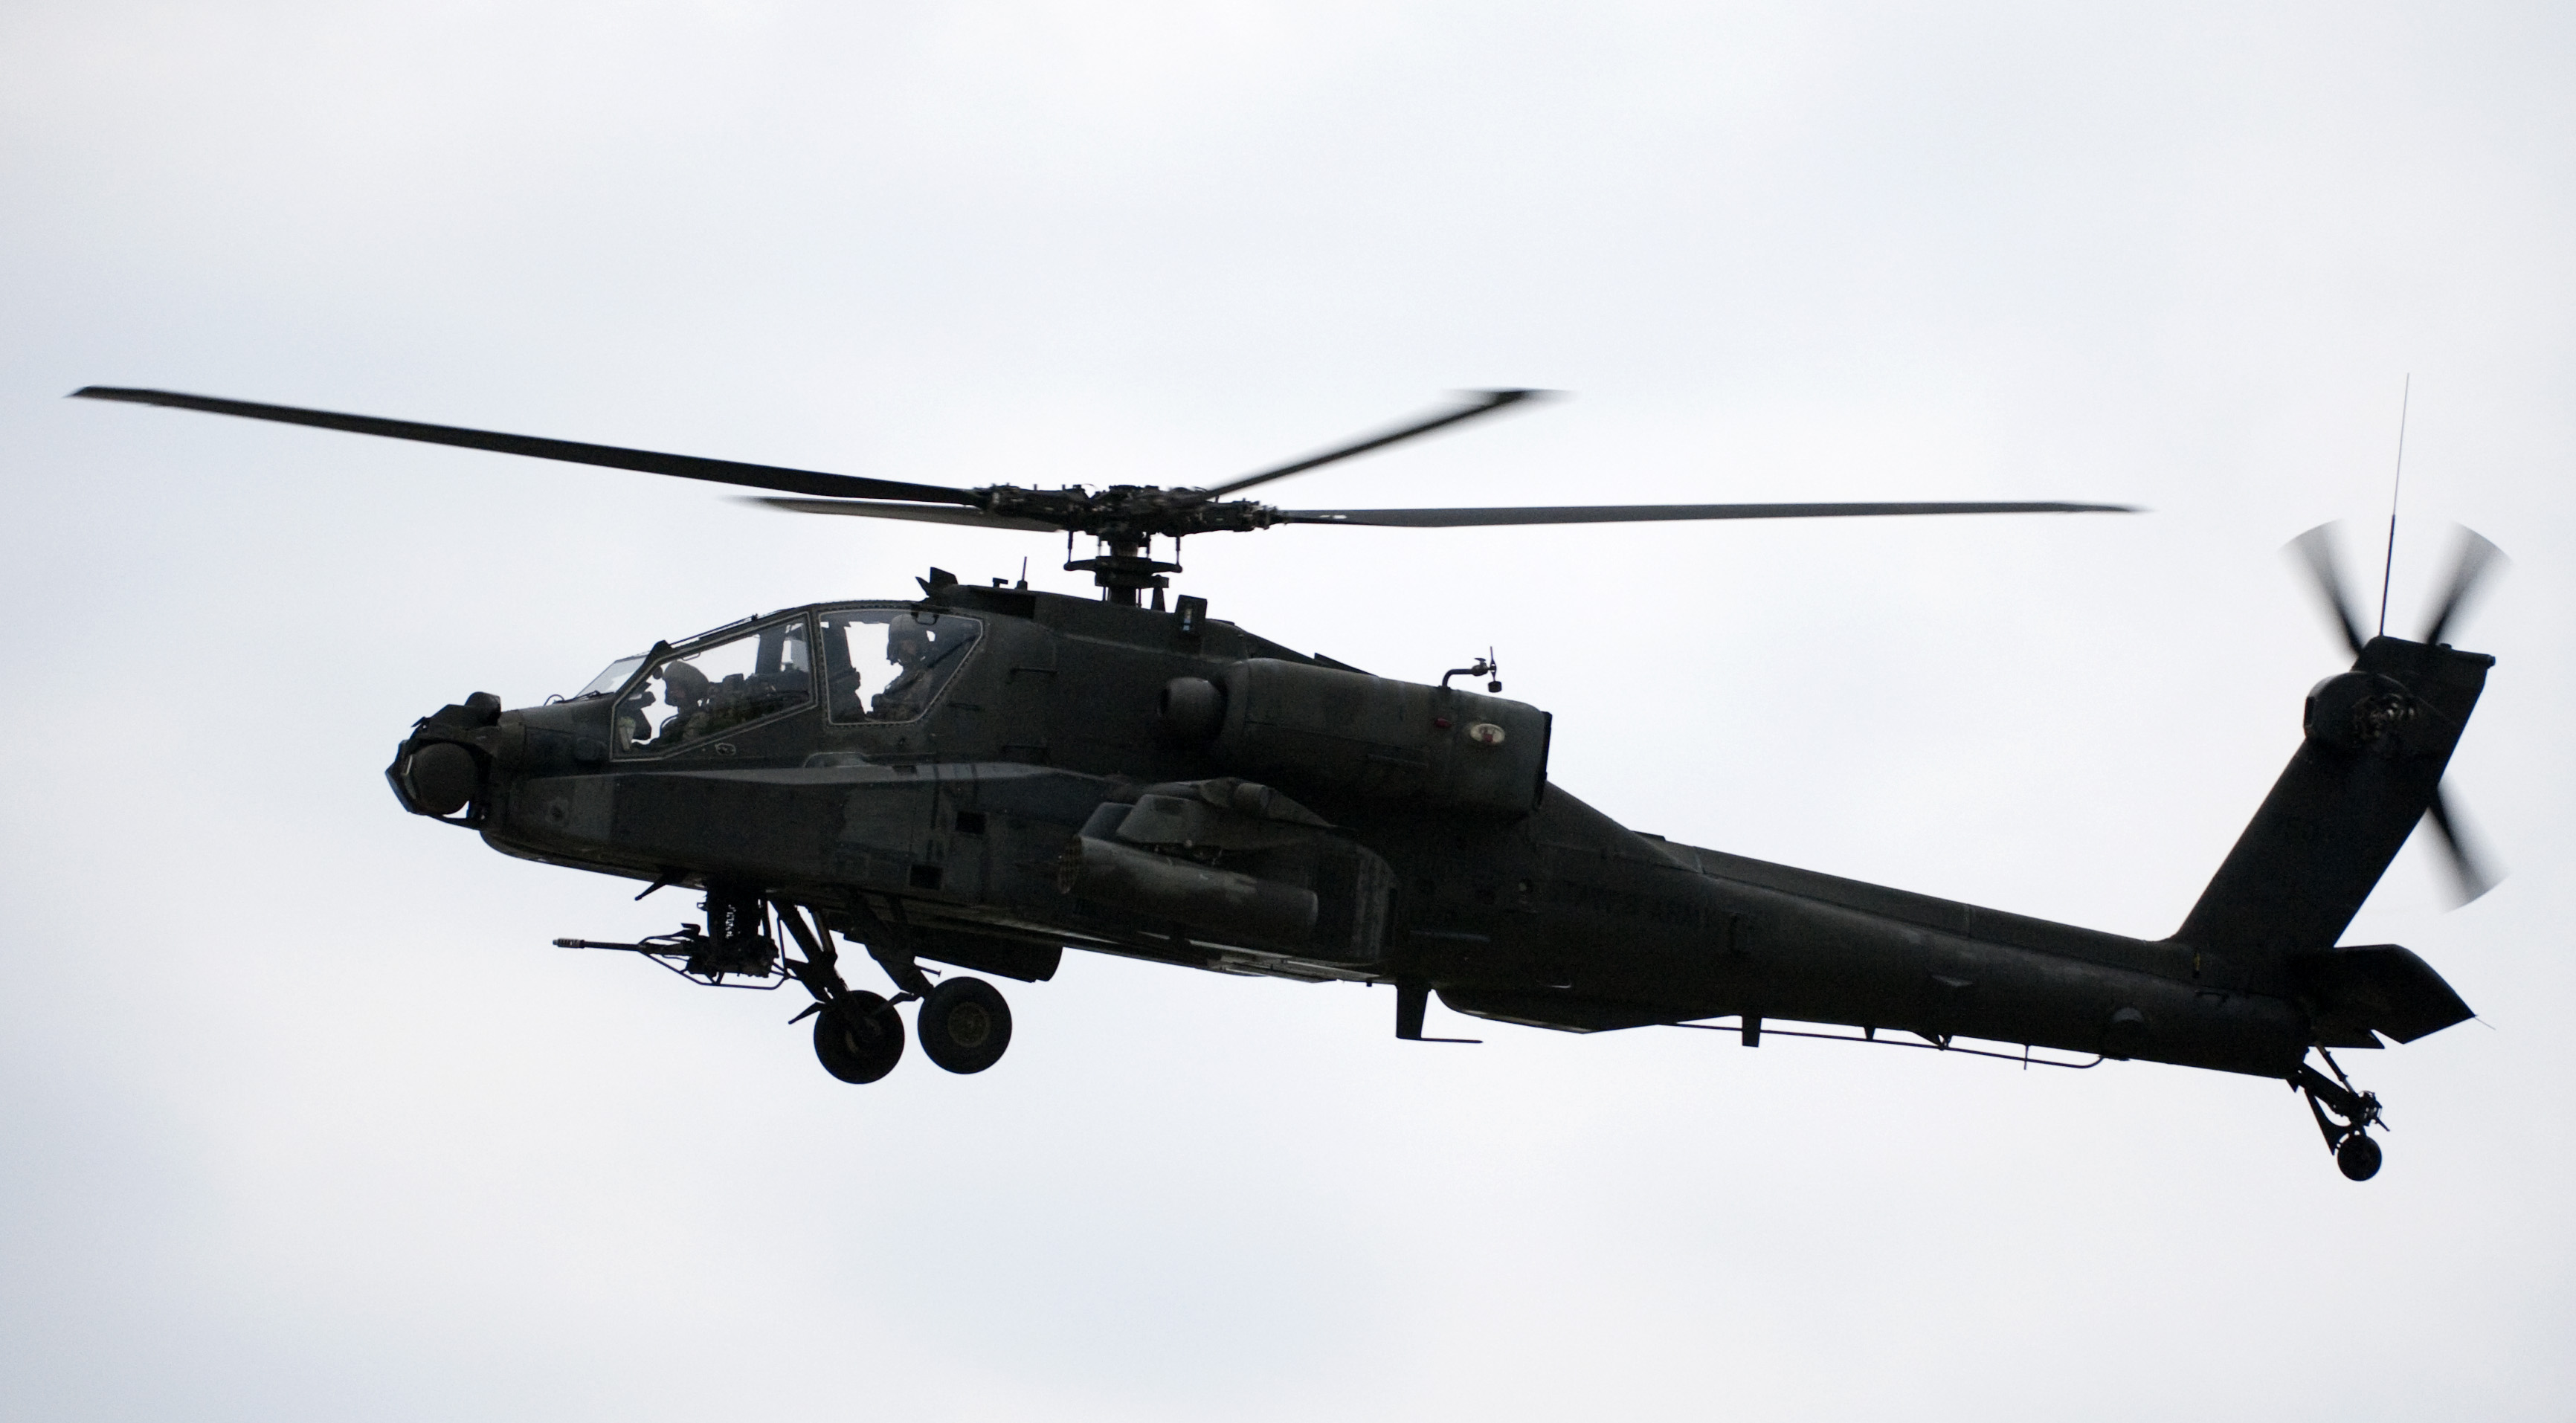 An Apache helicopter hovers over the race track during pre race ceremony before the start of the IRL IndyCar Series Meijer Indy 300 on August 1, 2009 at the Kentucky Speedway in Sparta, Kentucky. (Photo by Robert Laberge—Getty Images)